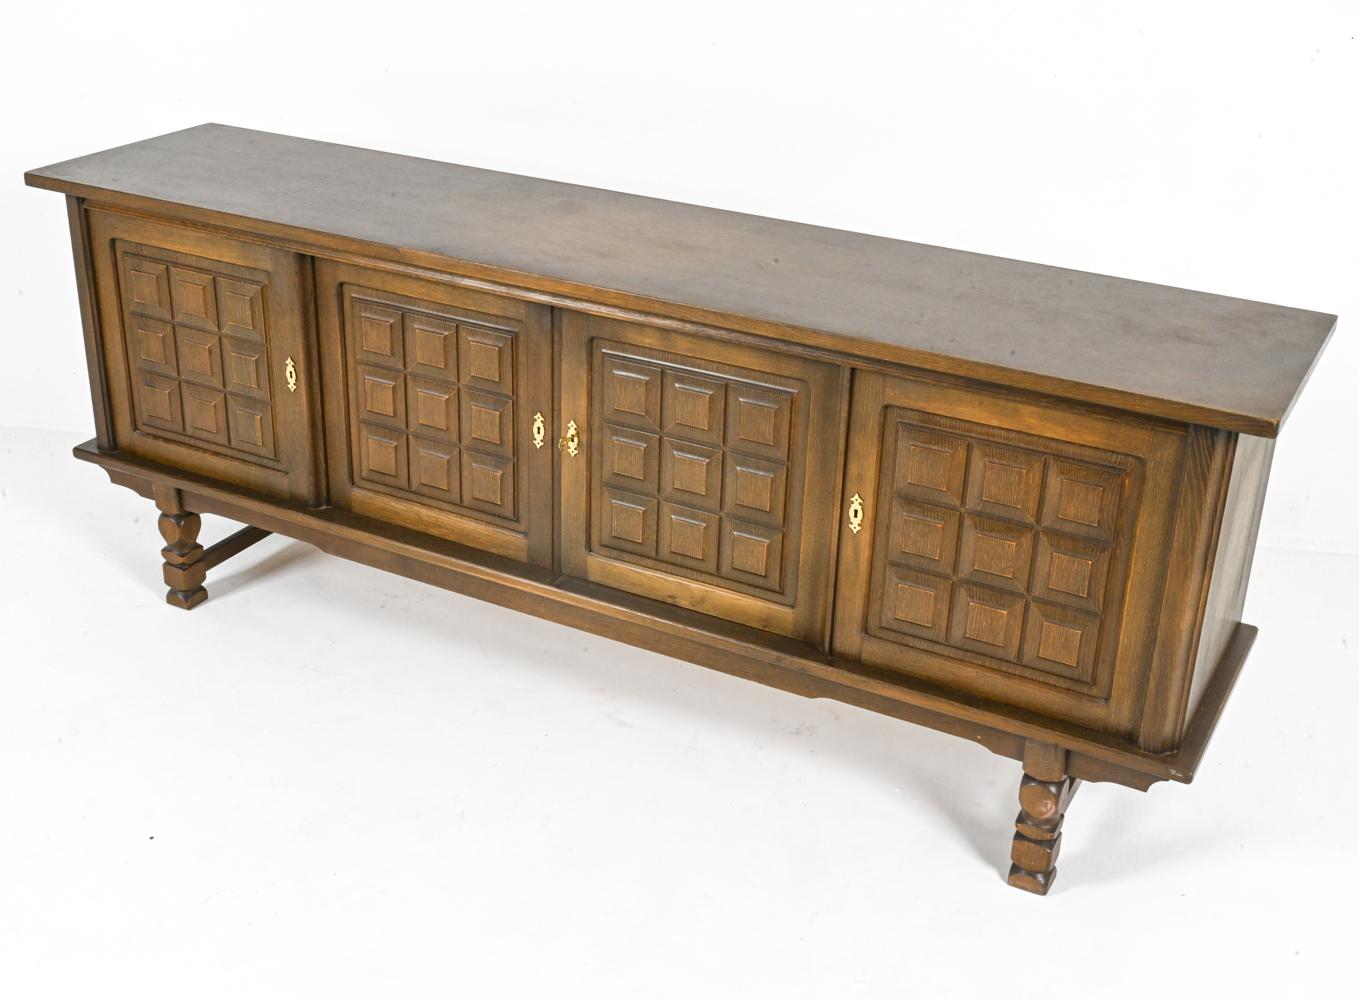 This exceptional sideboard embodies the essence of Danish Modern design, expertly crafted from solid oak by renowned furniture designer Henning Kjærnulf. His signature style is evident in the bold and classic carved design, most notable on the front